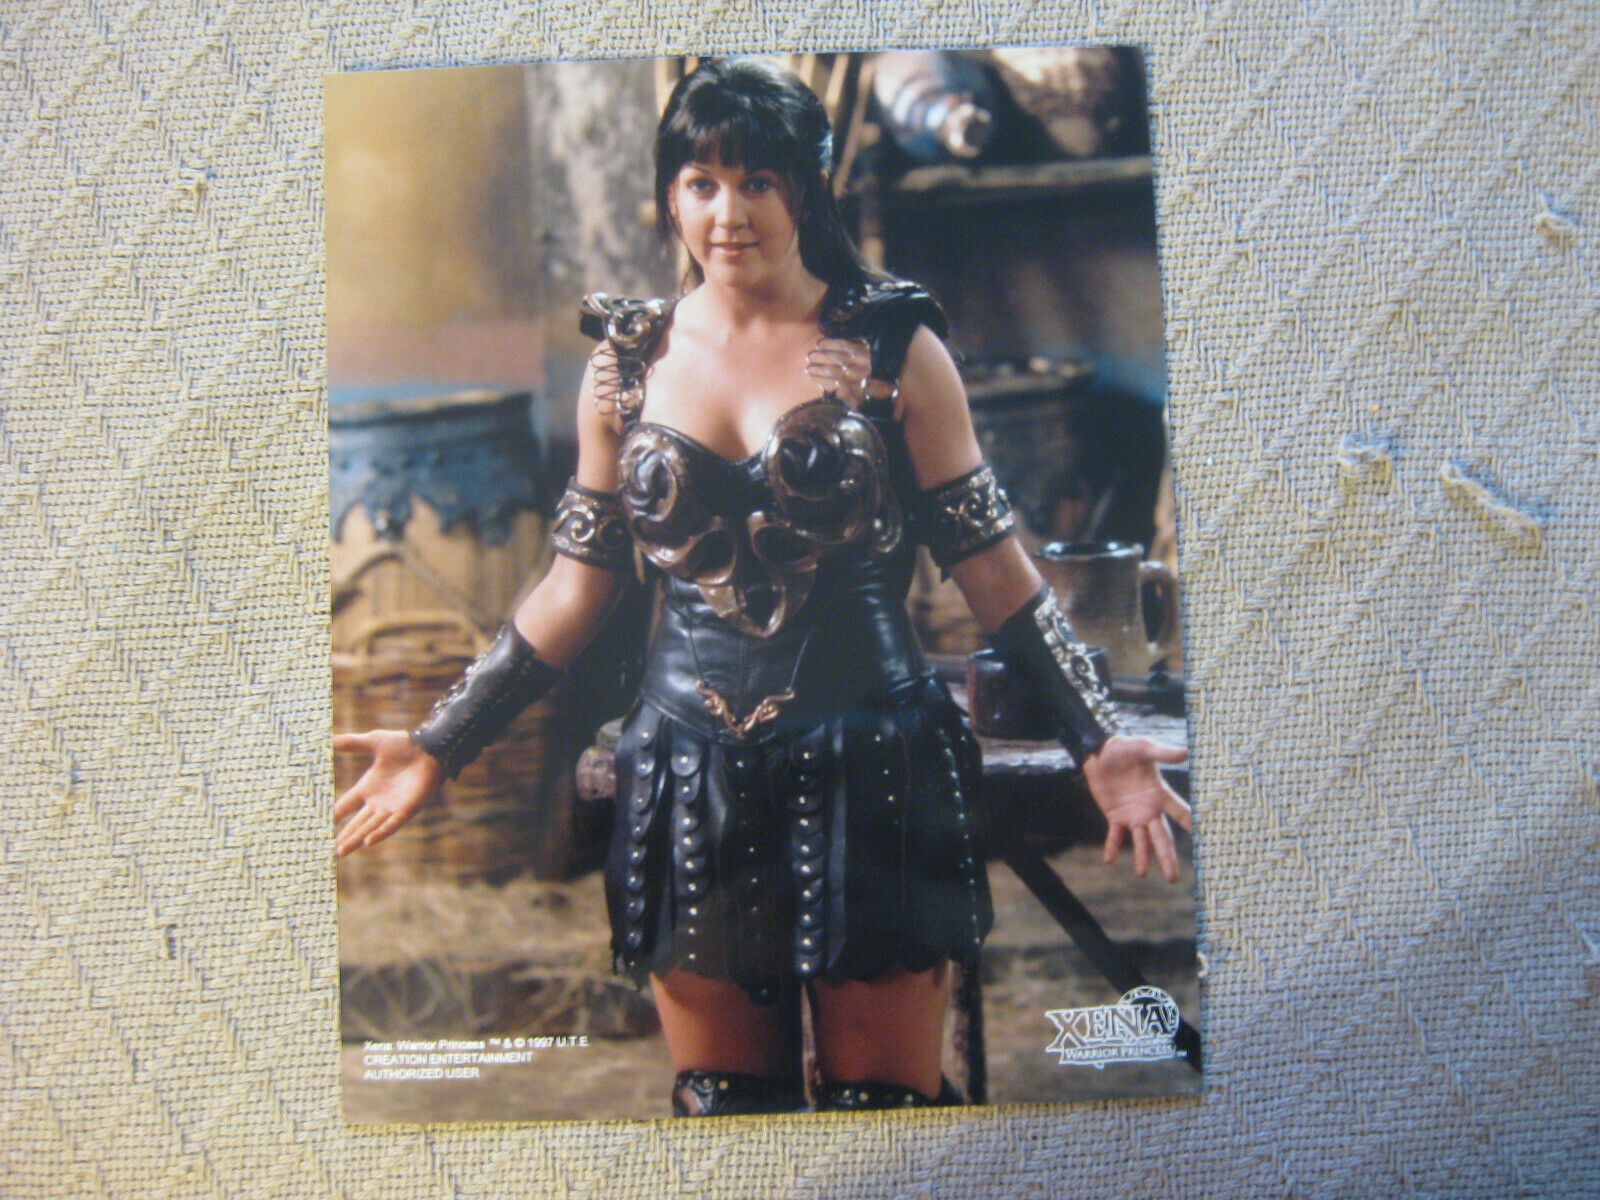 Xena Warrior Princess - Lucy Lawless 8x10 Official Creation Photo